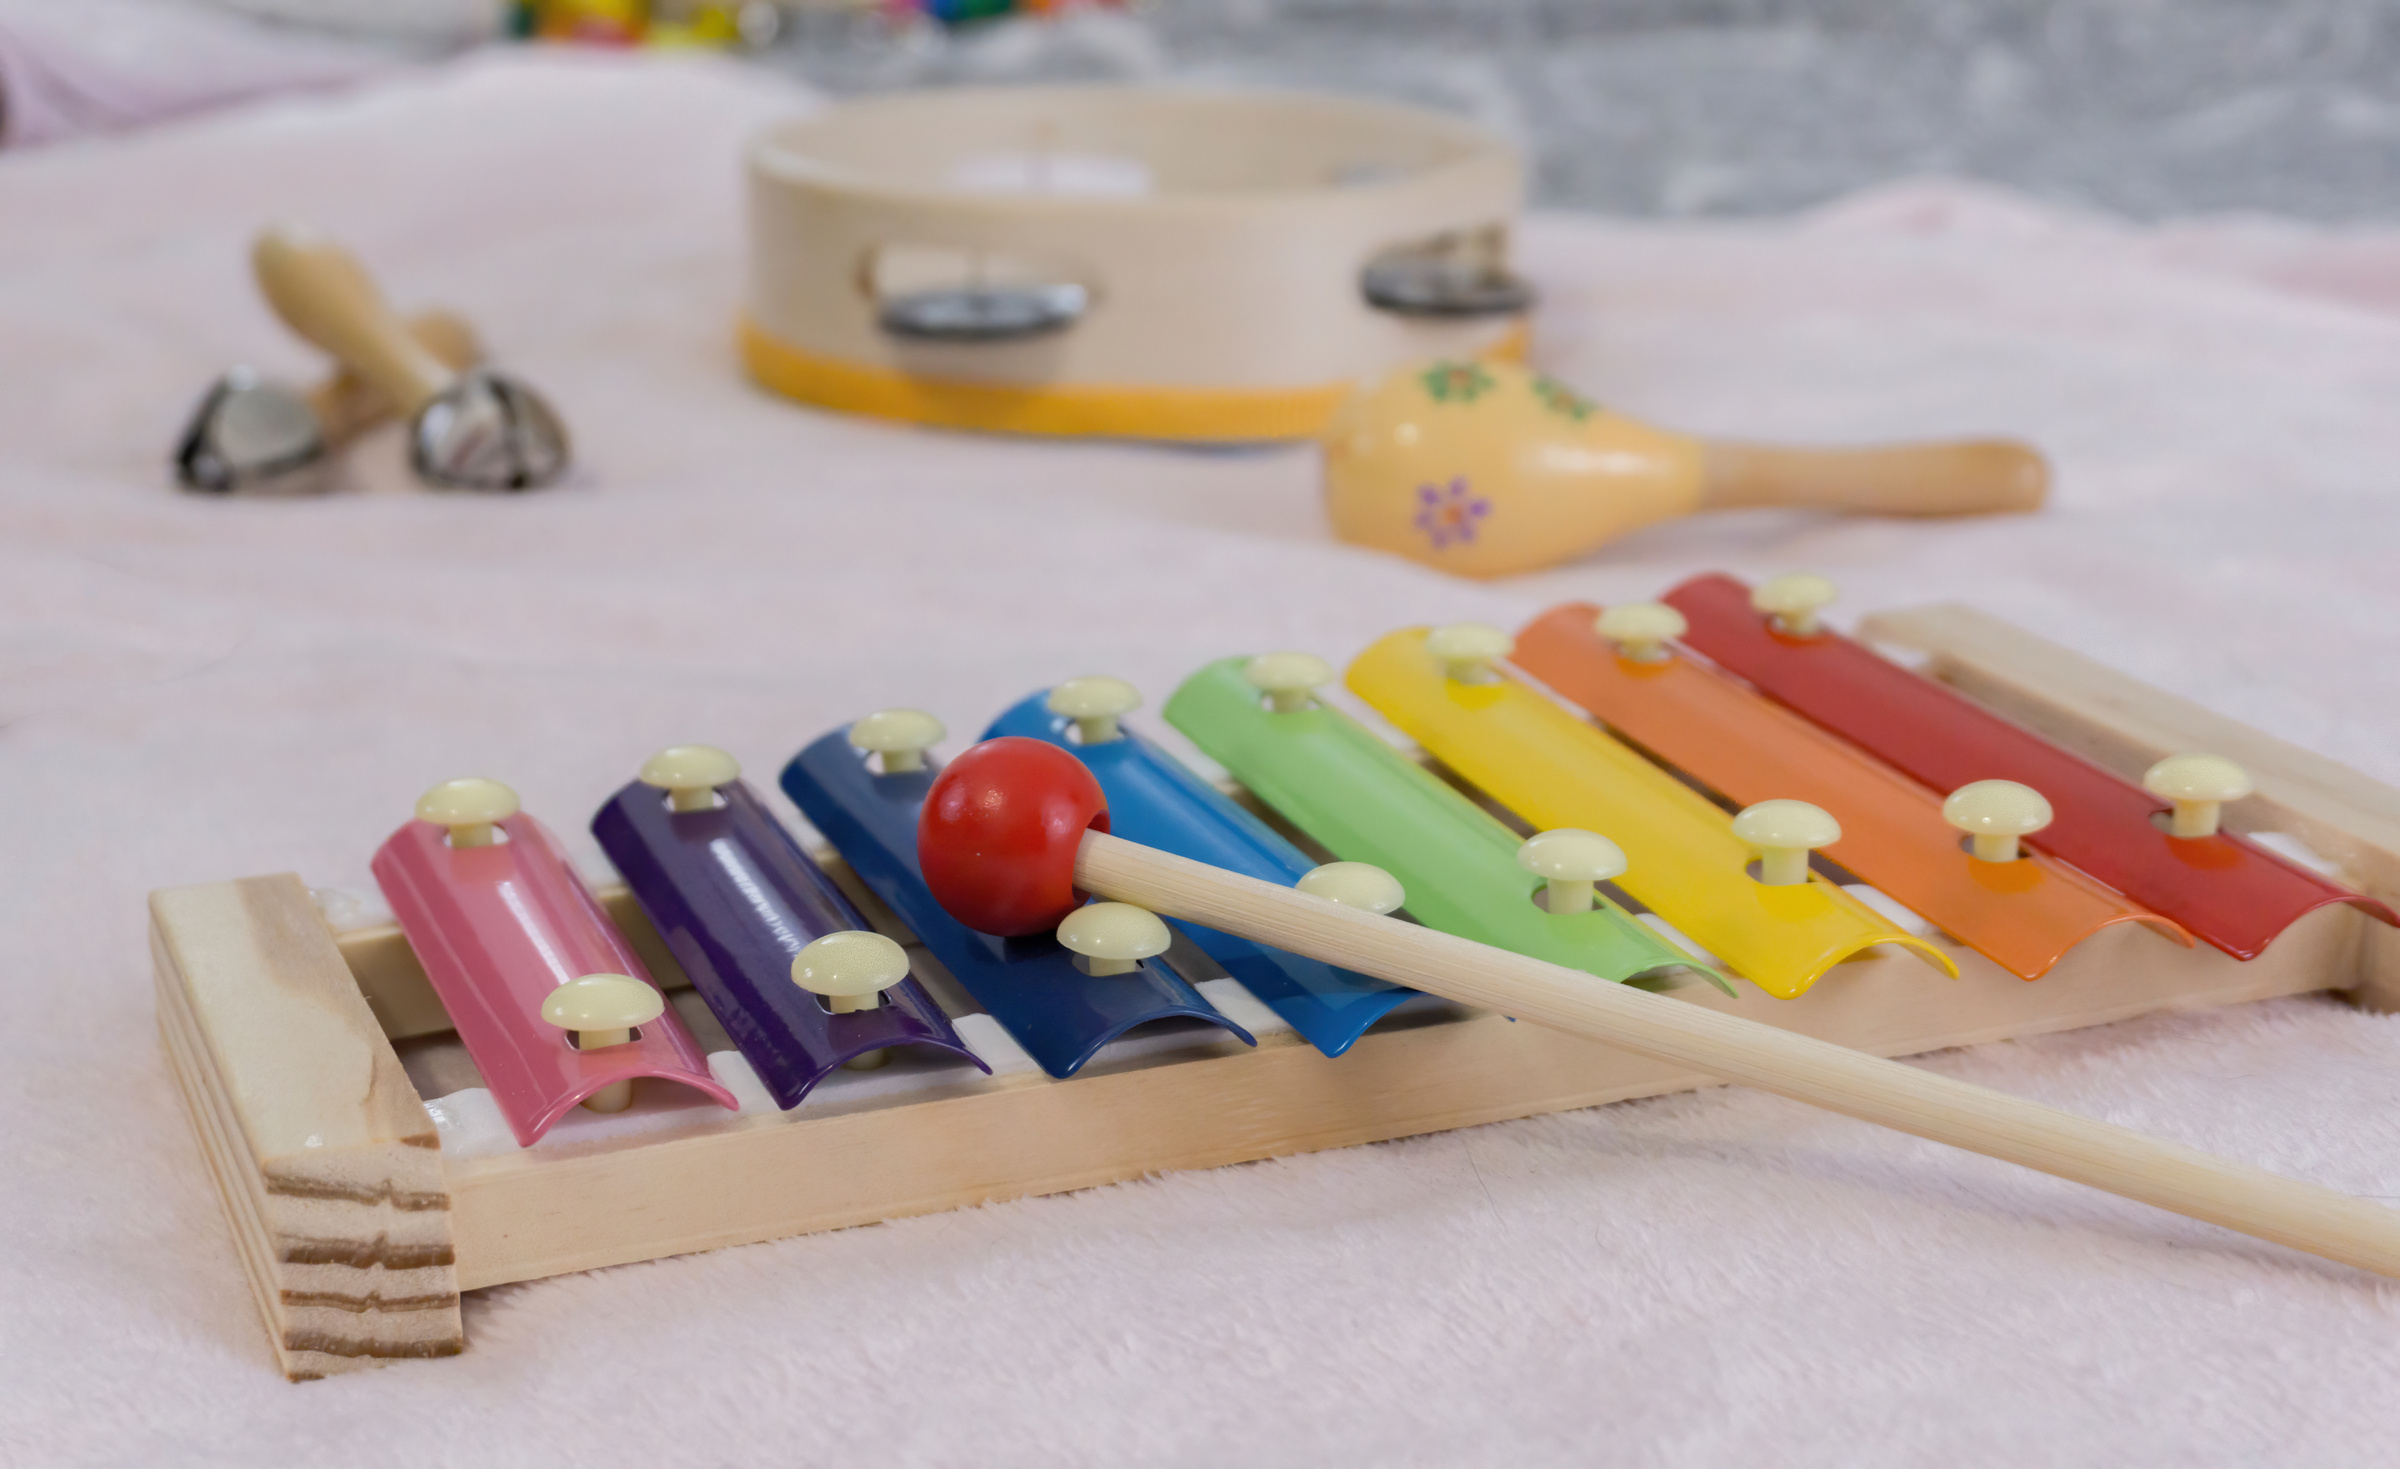 colorful musical instruments for children for early stimulation, motor skills and music learning from a young age